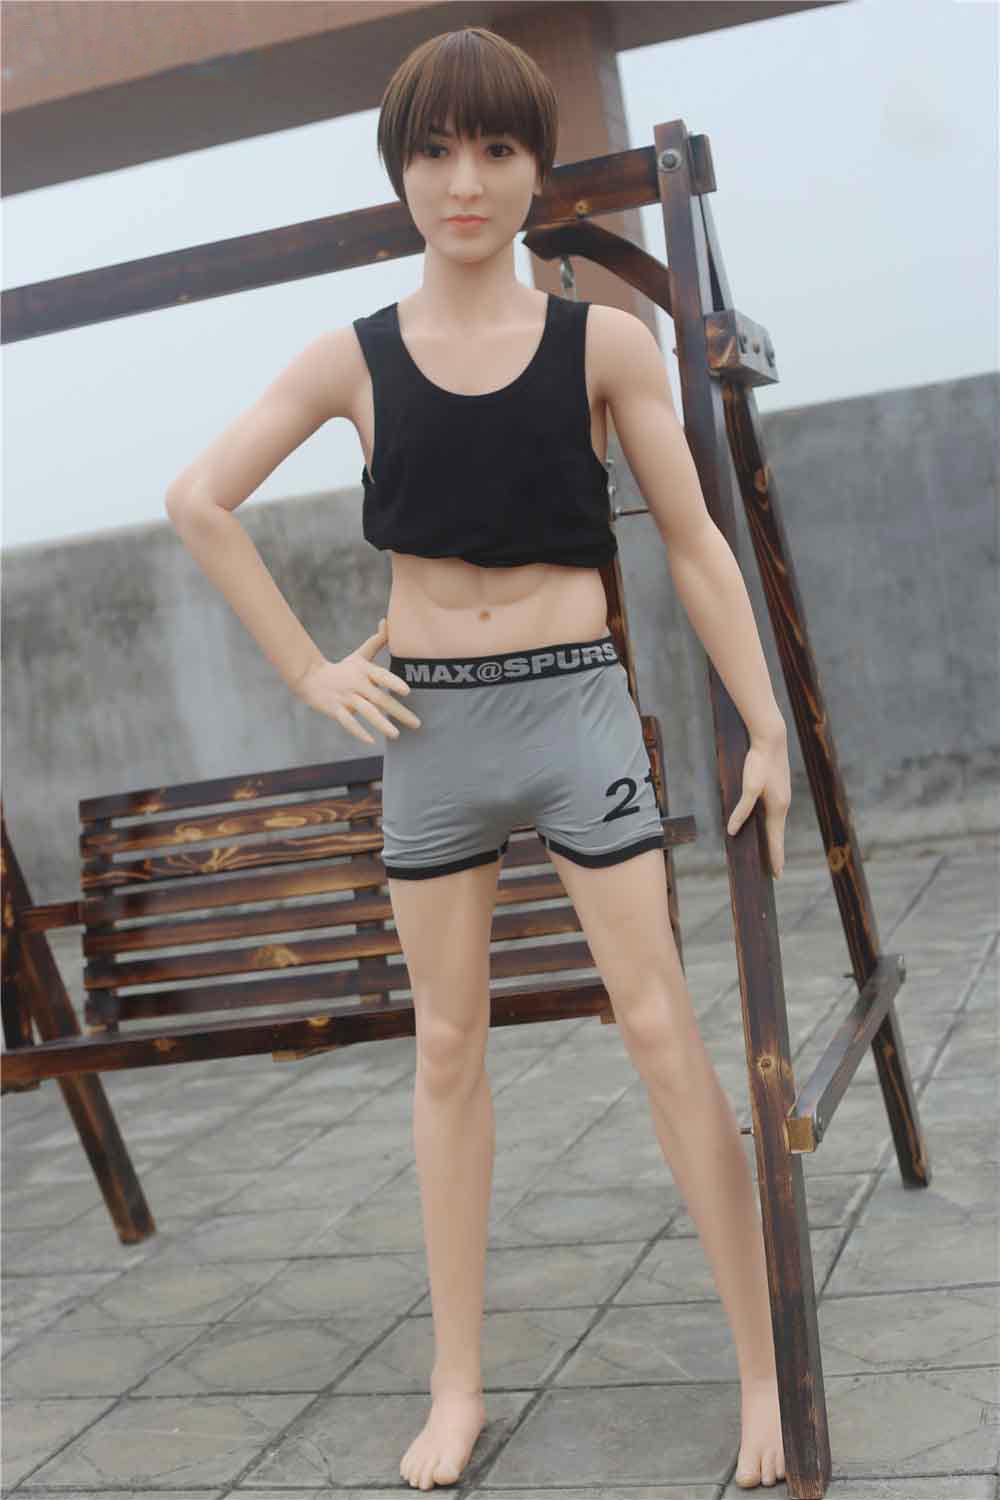 male real doll6 1